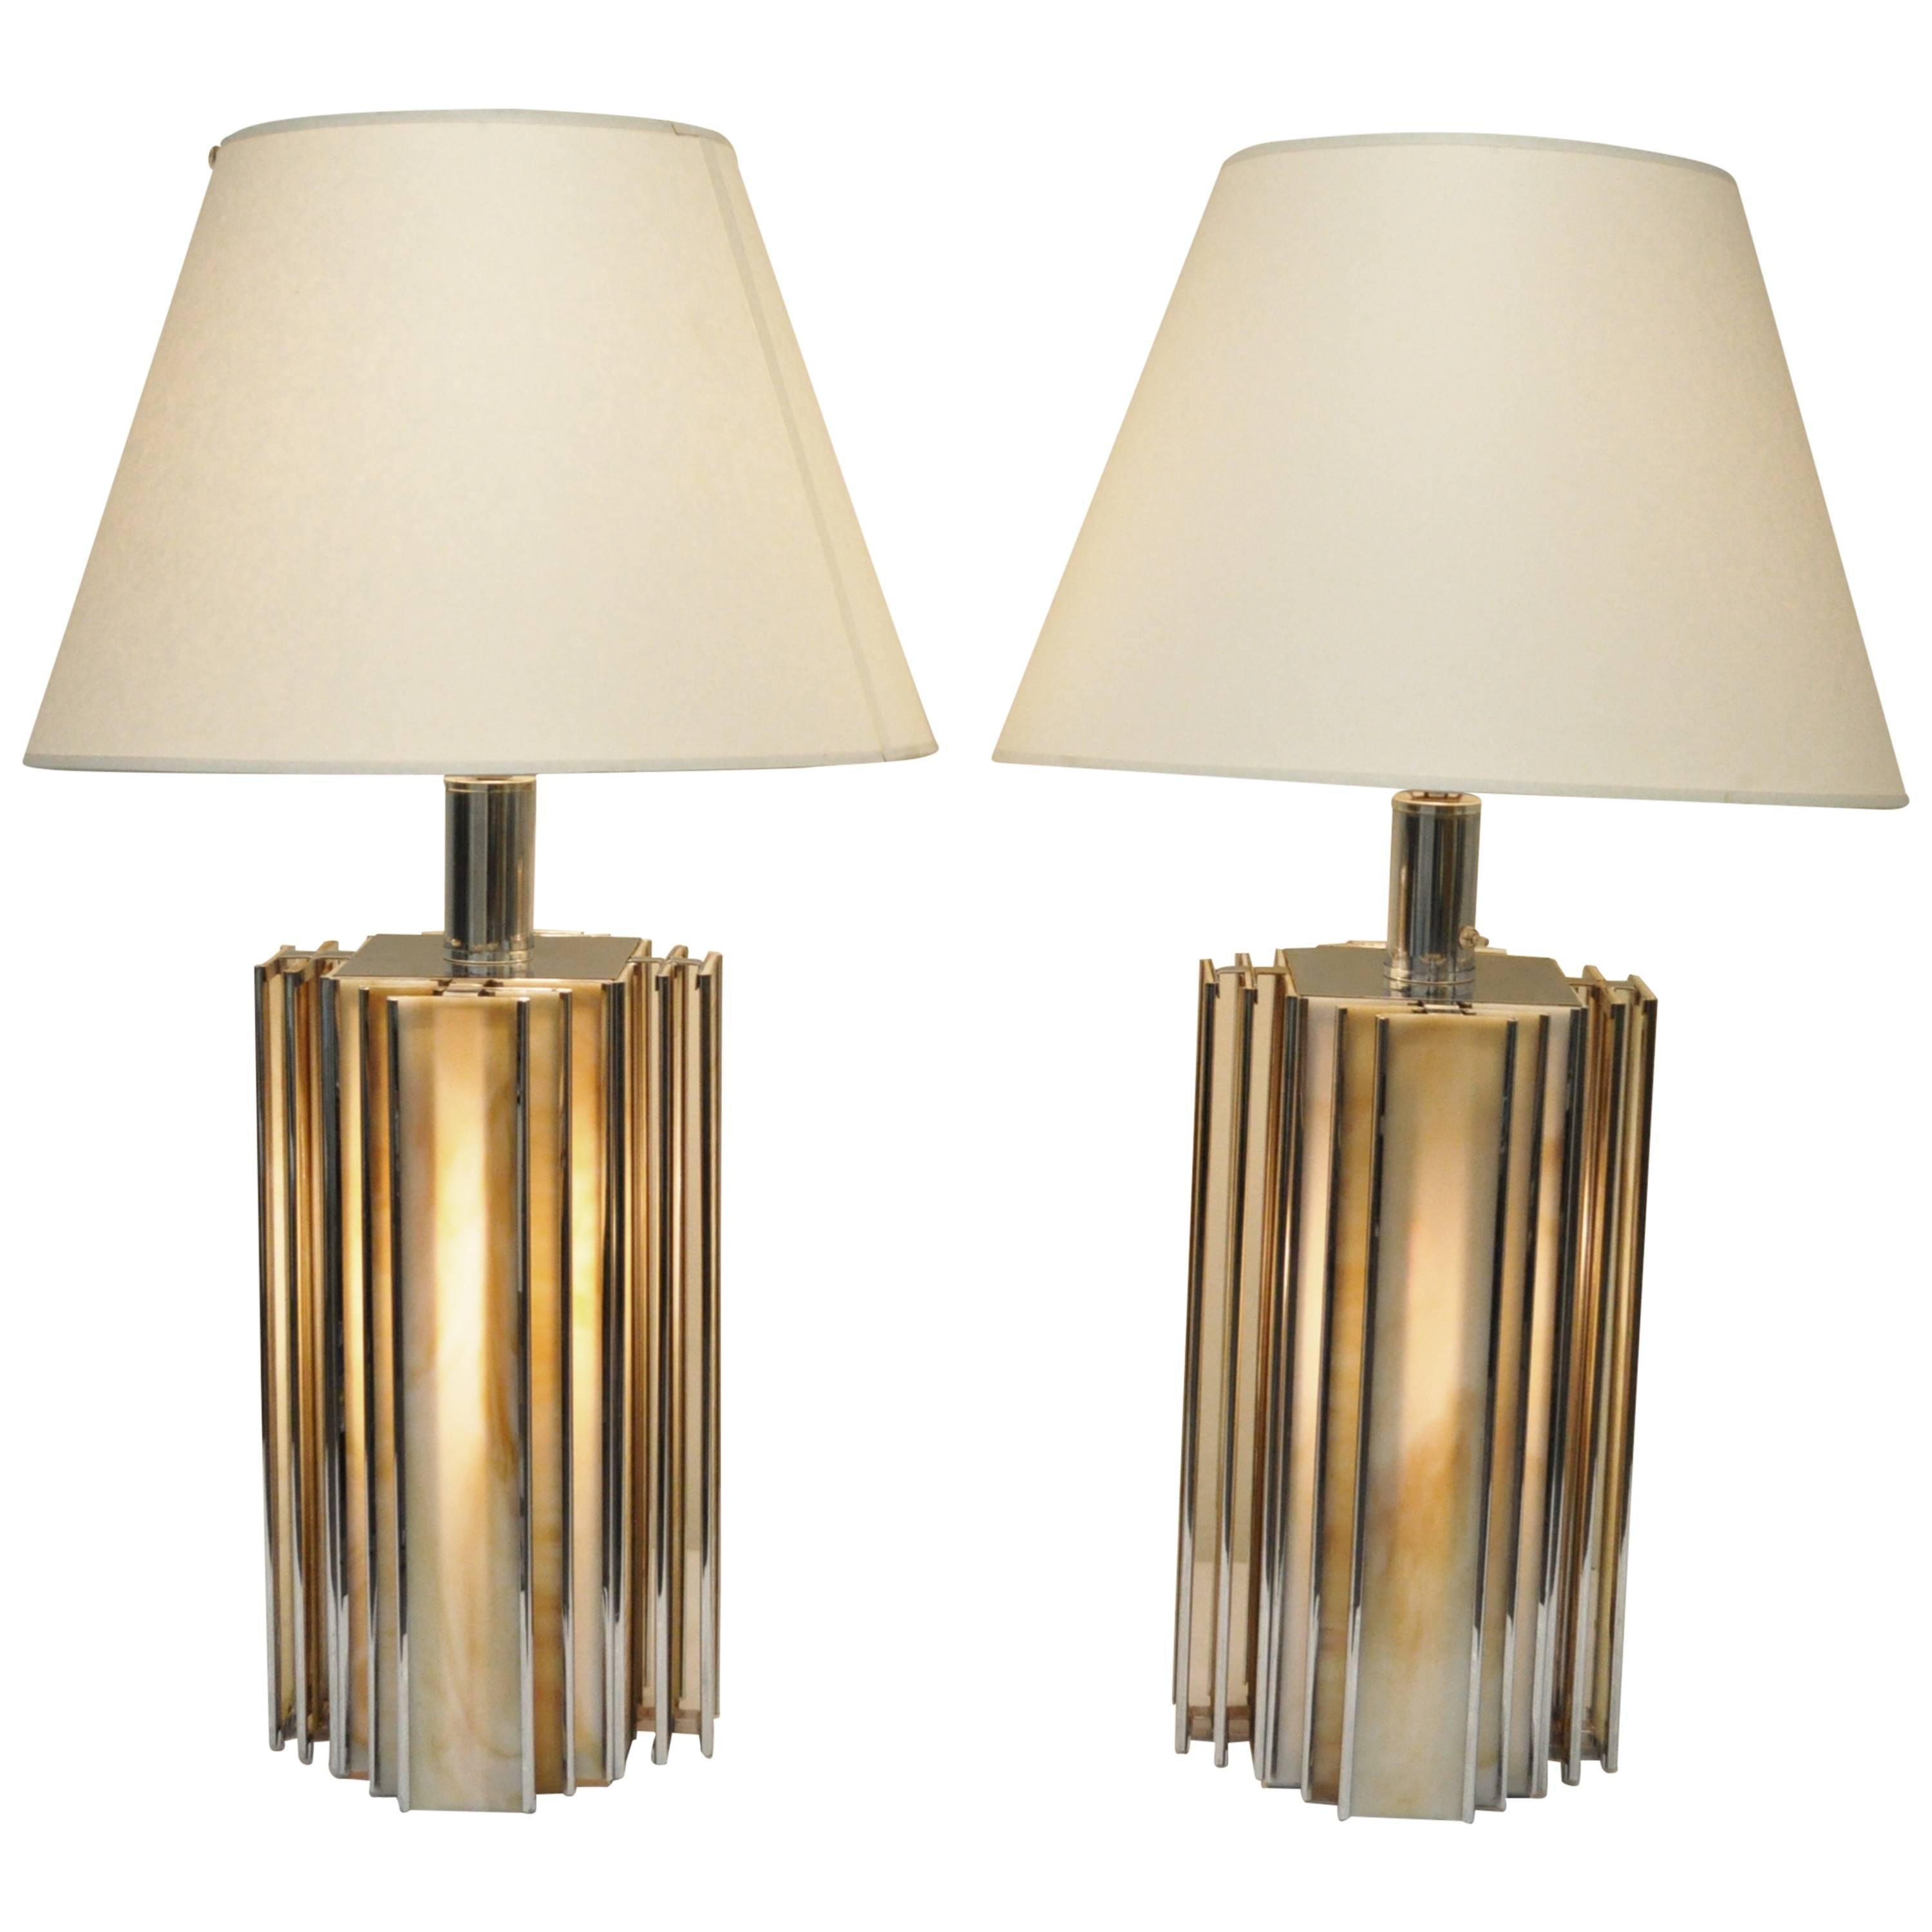 Pair of Mid-Century Modern Chrome and Slag Glass Table Lamps, Art Deco Style For Sale